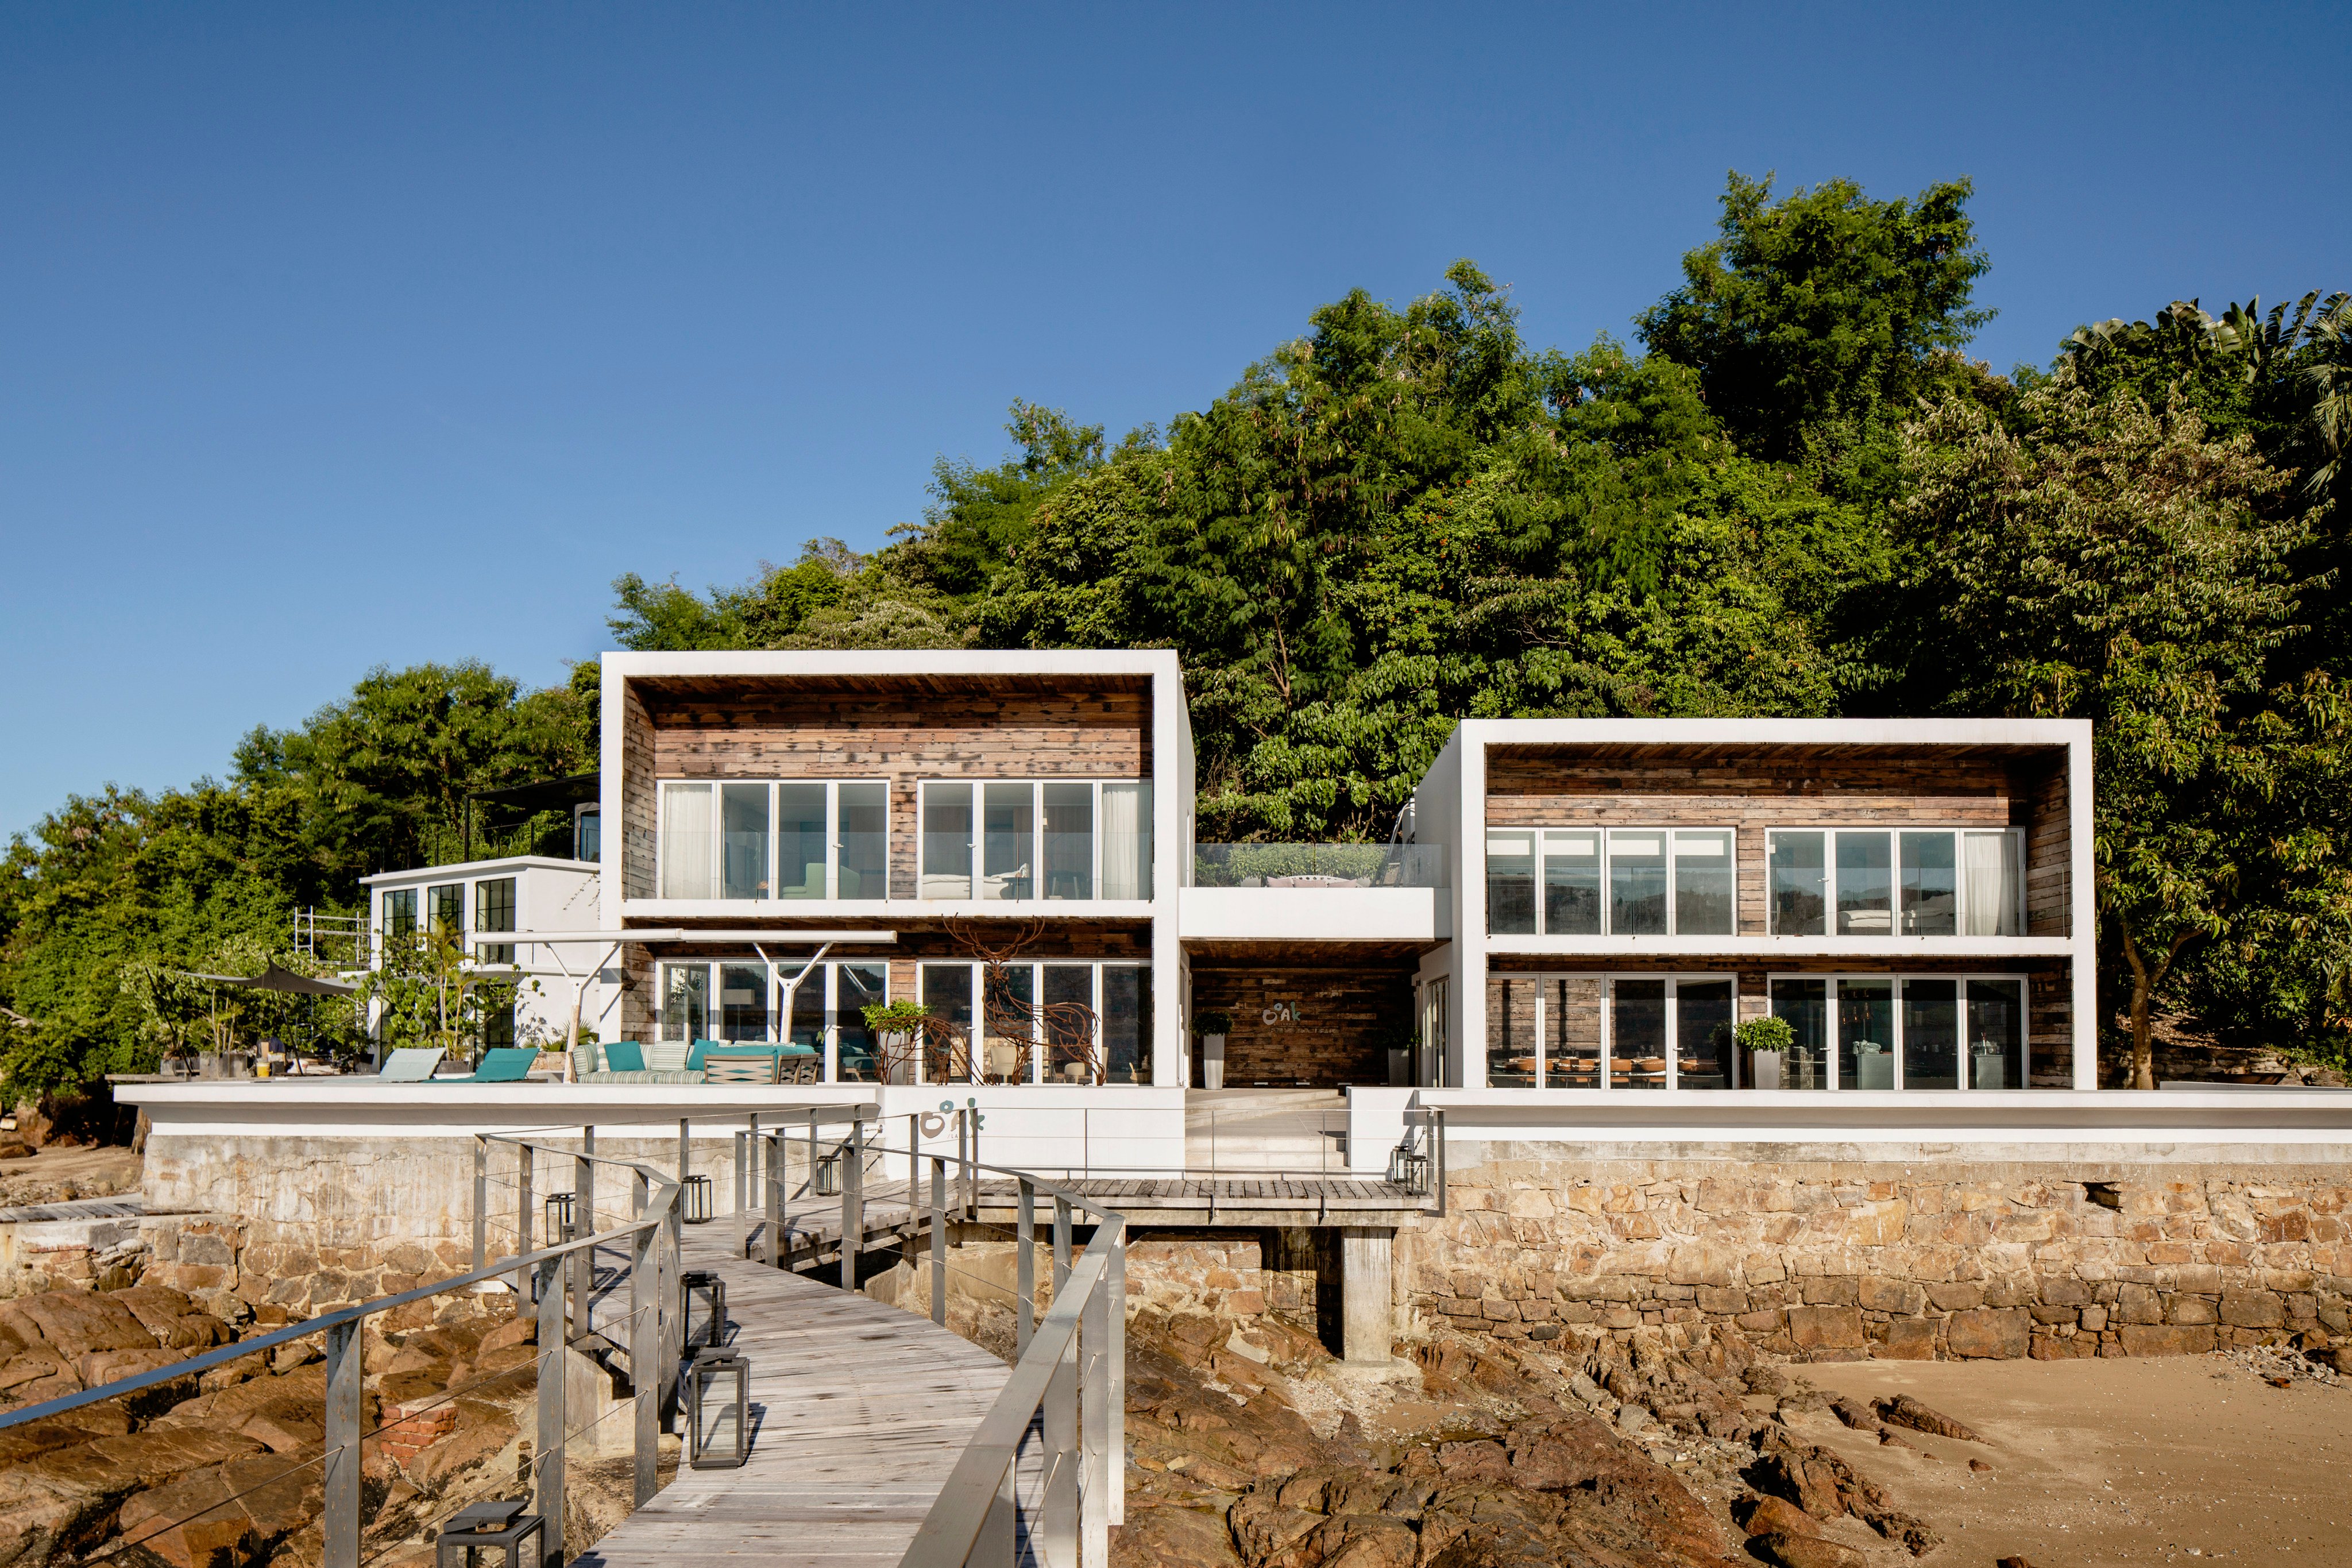 A designer built the ultimate weekend getaway on Lamma Island, in Hong Kong’s south, for his daughter. Photo: Amanda Kho